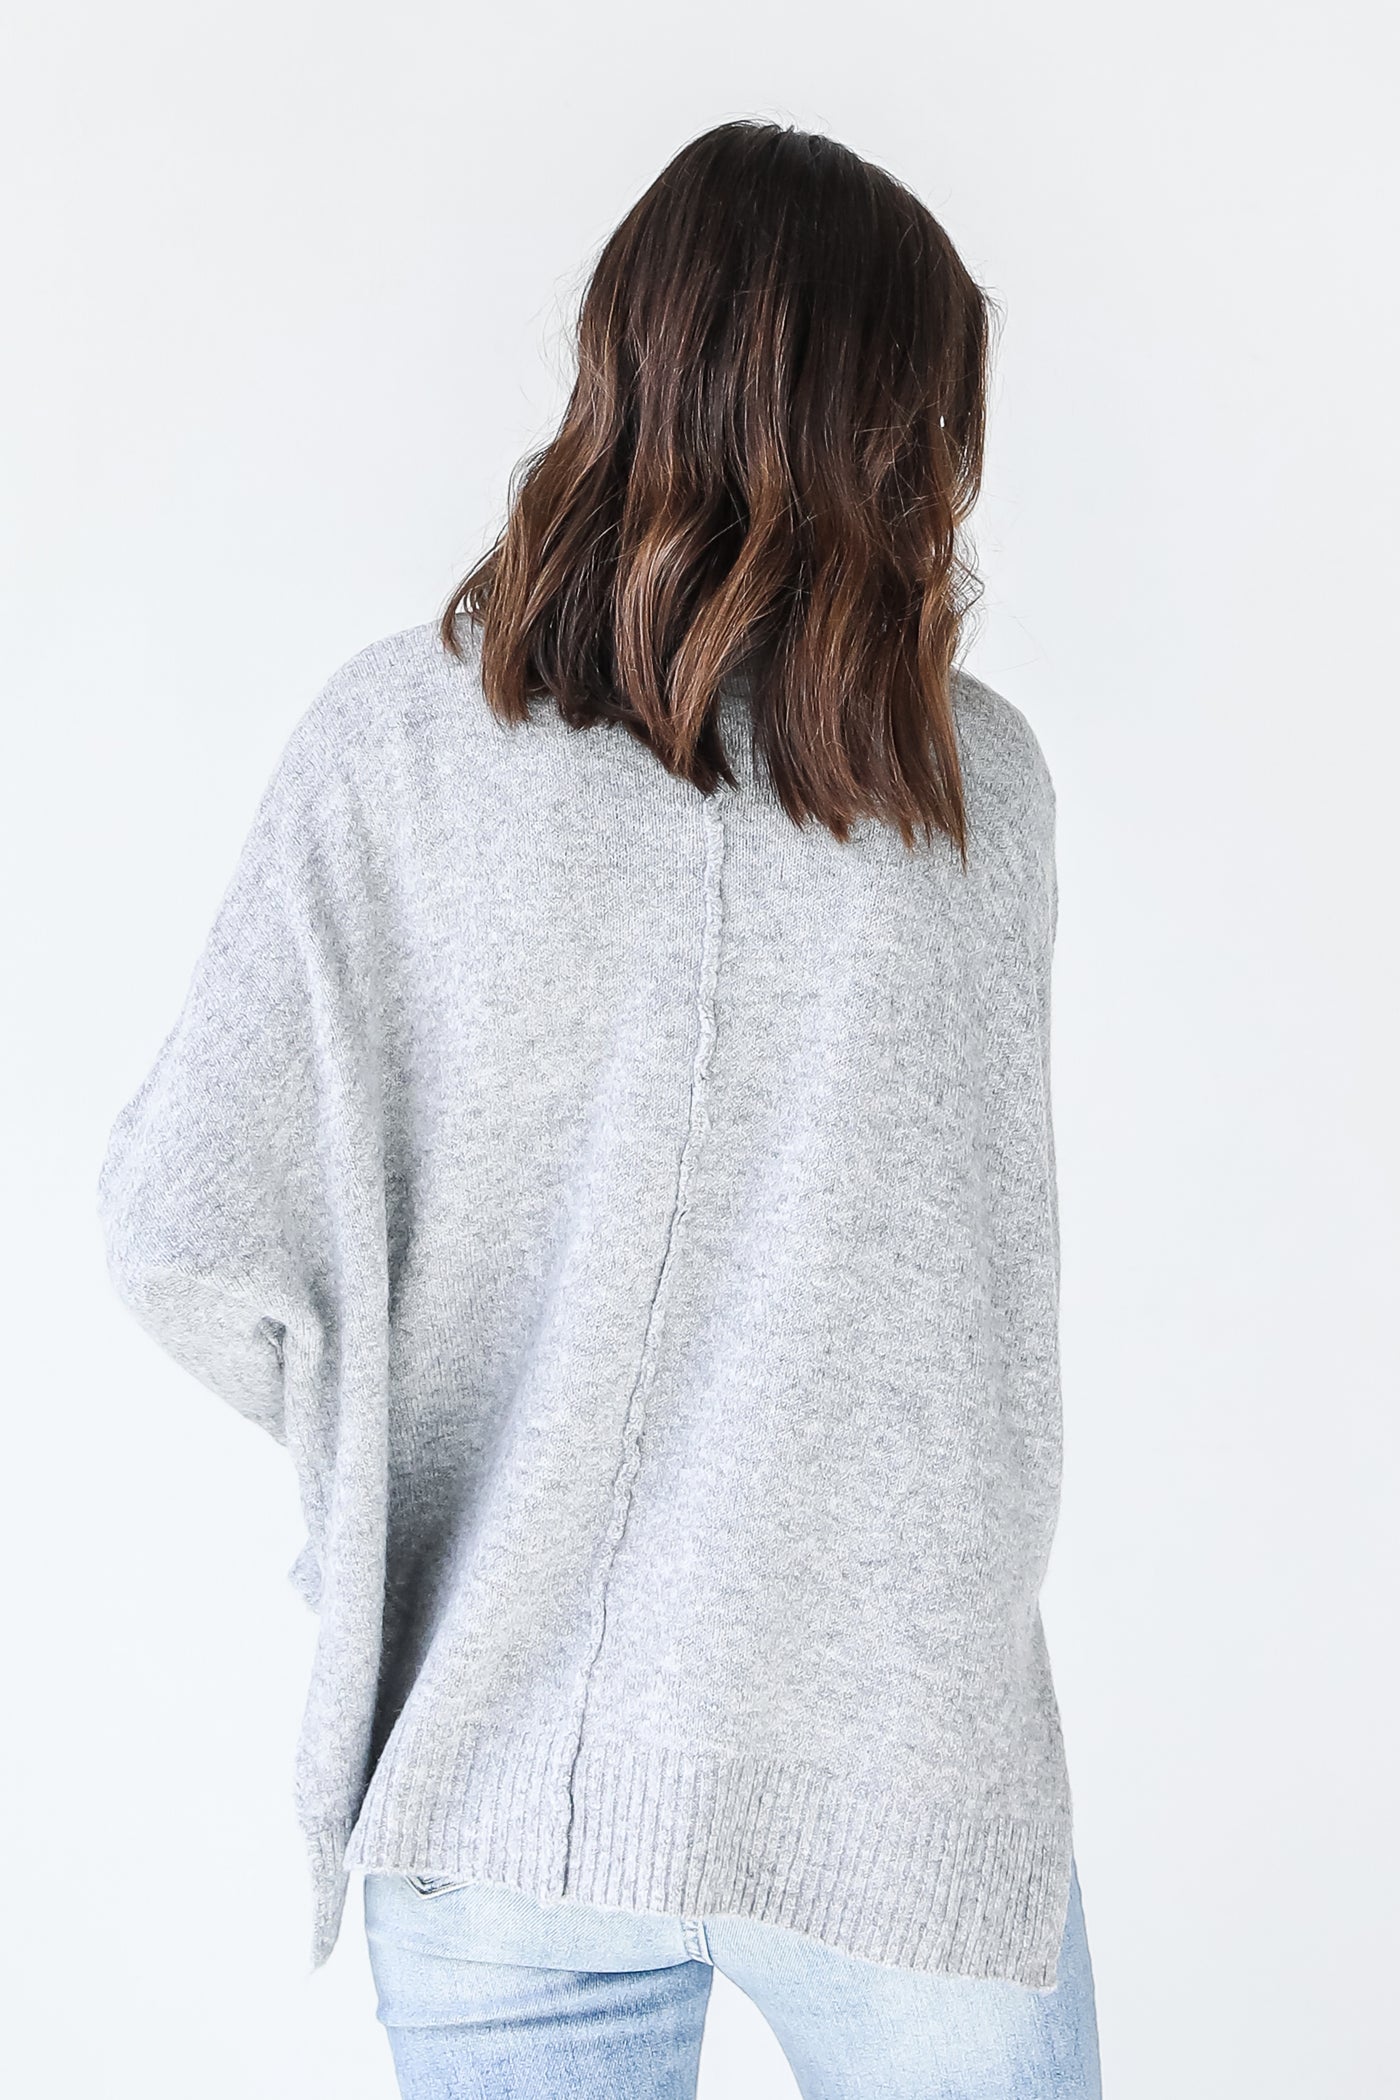 Sweater in heather grey back view